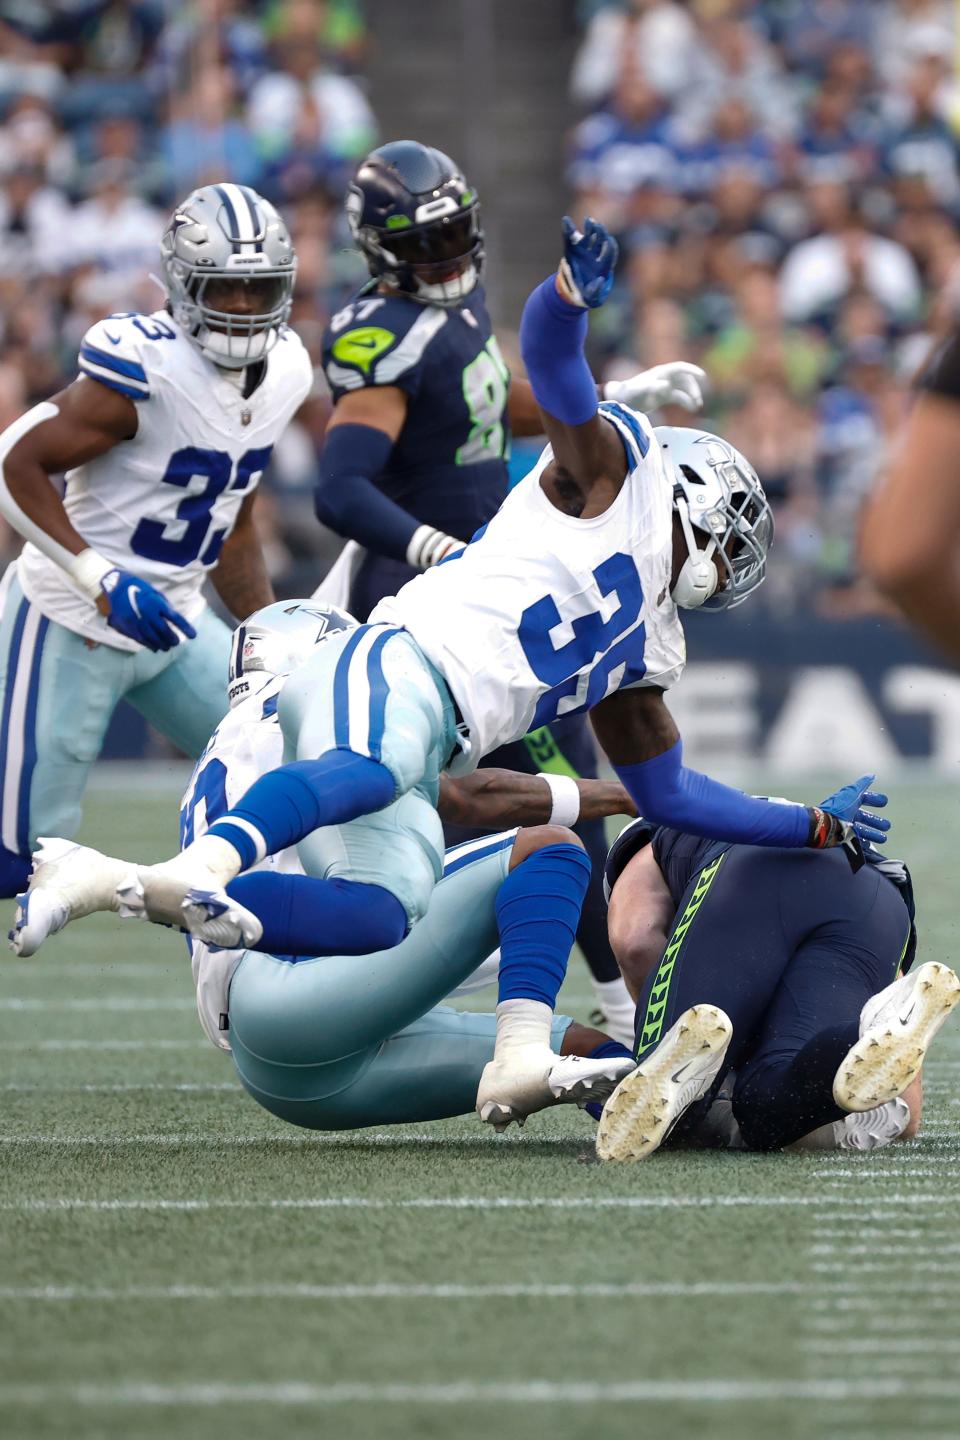 Dallas Cowboys linebacker DeMarvion Overshown (35) tackles Seattle Seahawks tight end Will Dissly (89) after a catch during the first half of an NFL preseason football game, Saturday, Aug. 19, 2023 in Seattle. The Seahawks defeated the Cowboys, 22-14. (James D. Smith via AP)